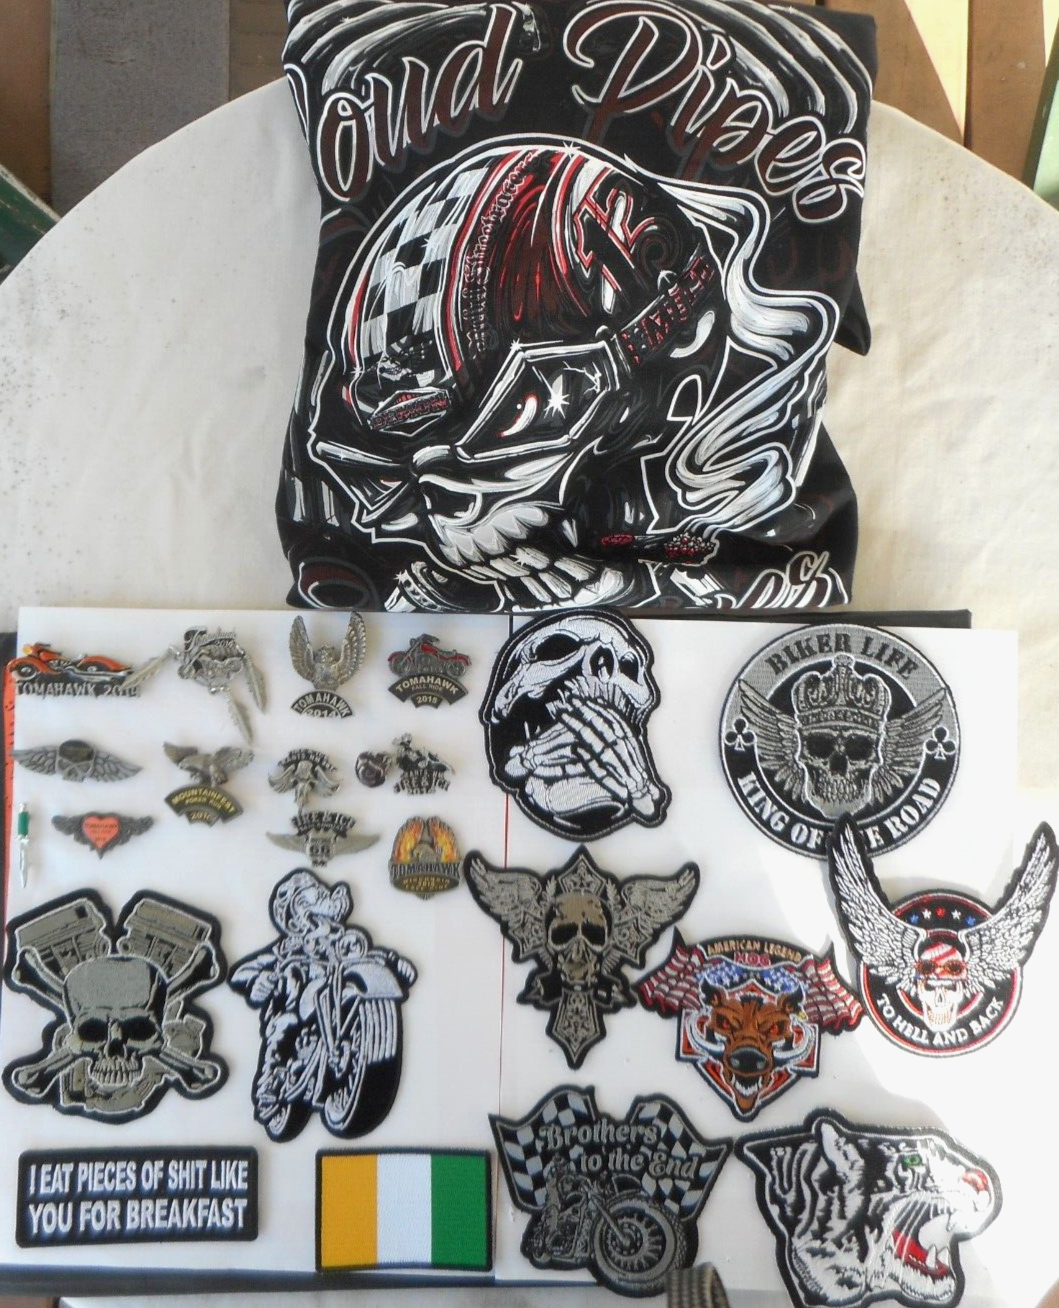 Lot Of  24 Pieces  Biker Pins, Patches, & Short Slv. Tee XLG  Lot # 307 Без бренда